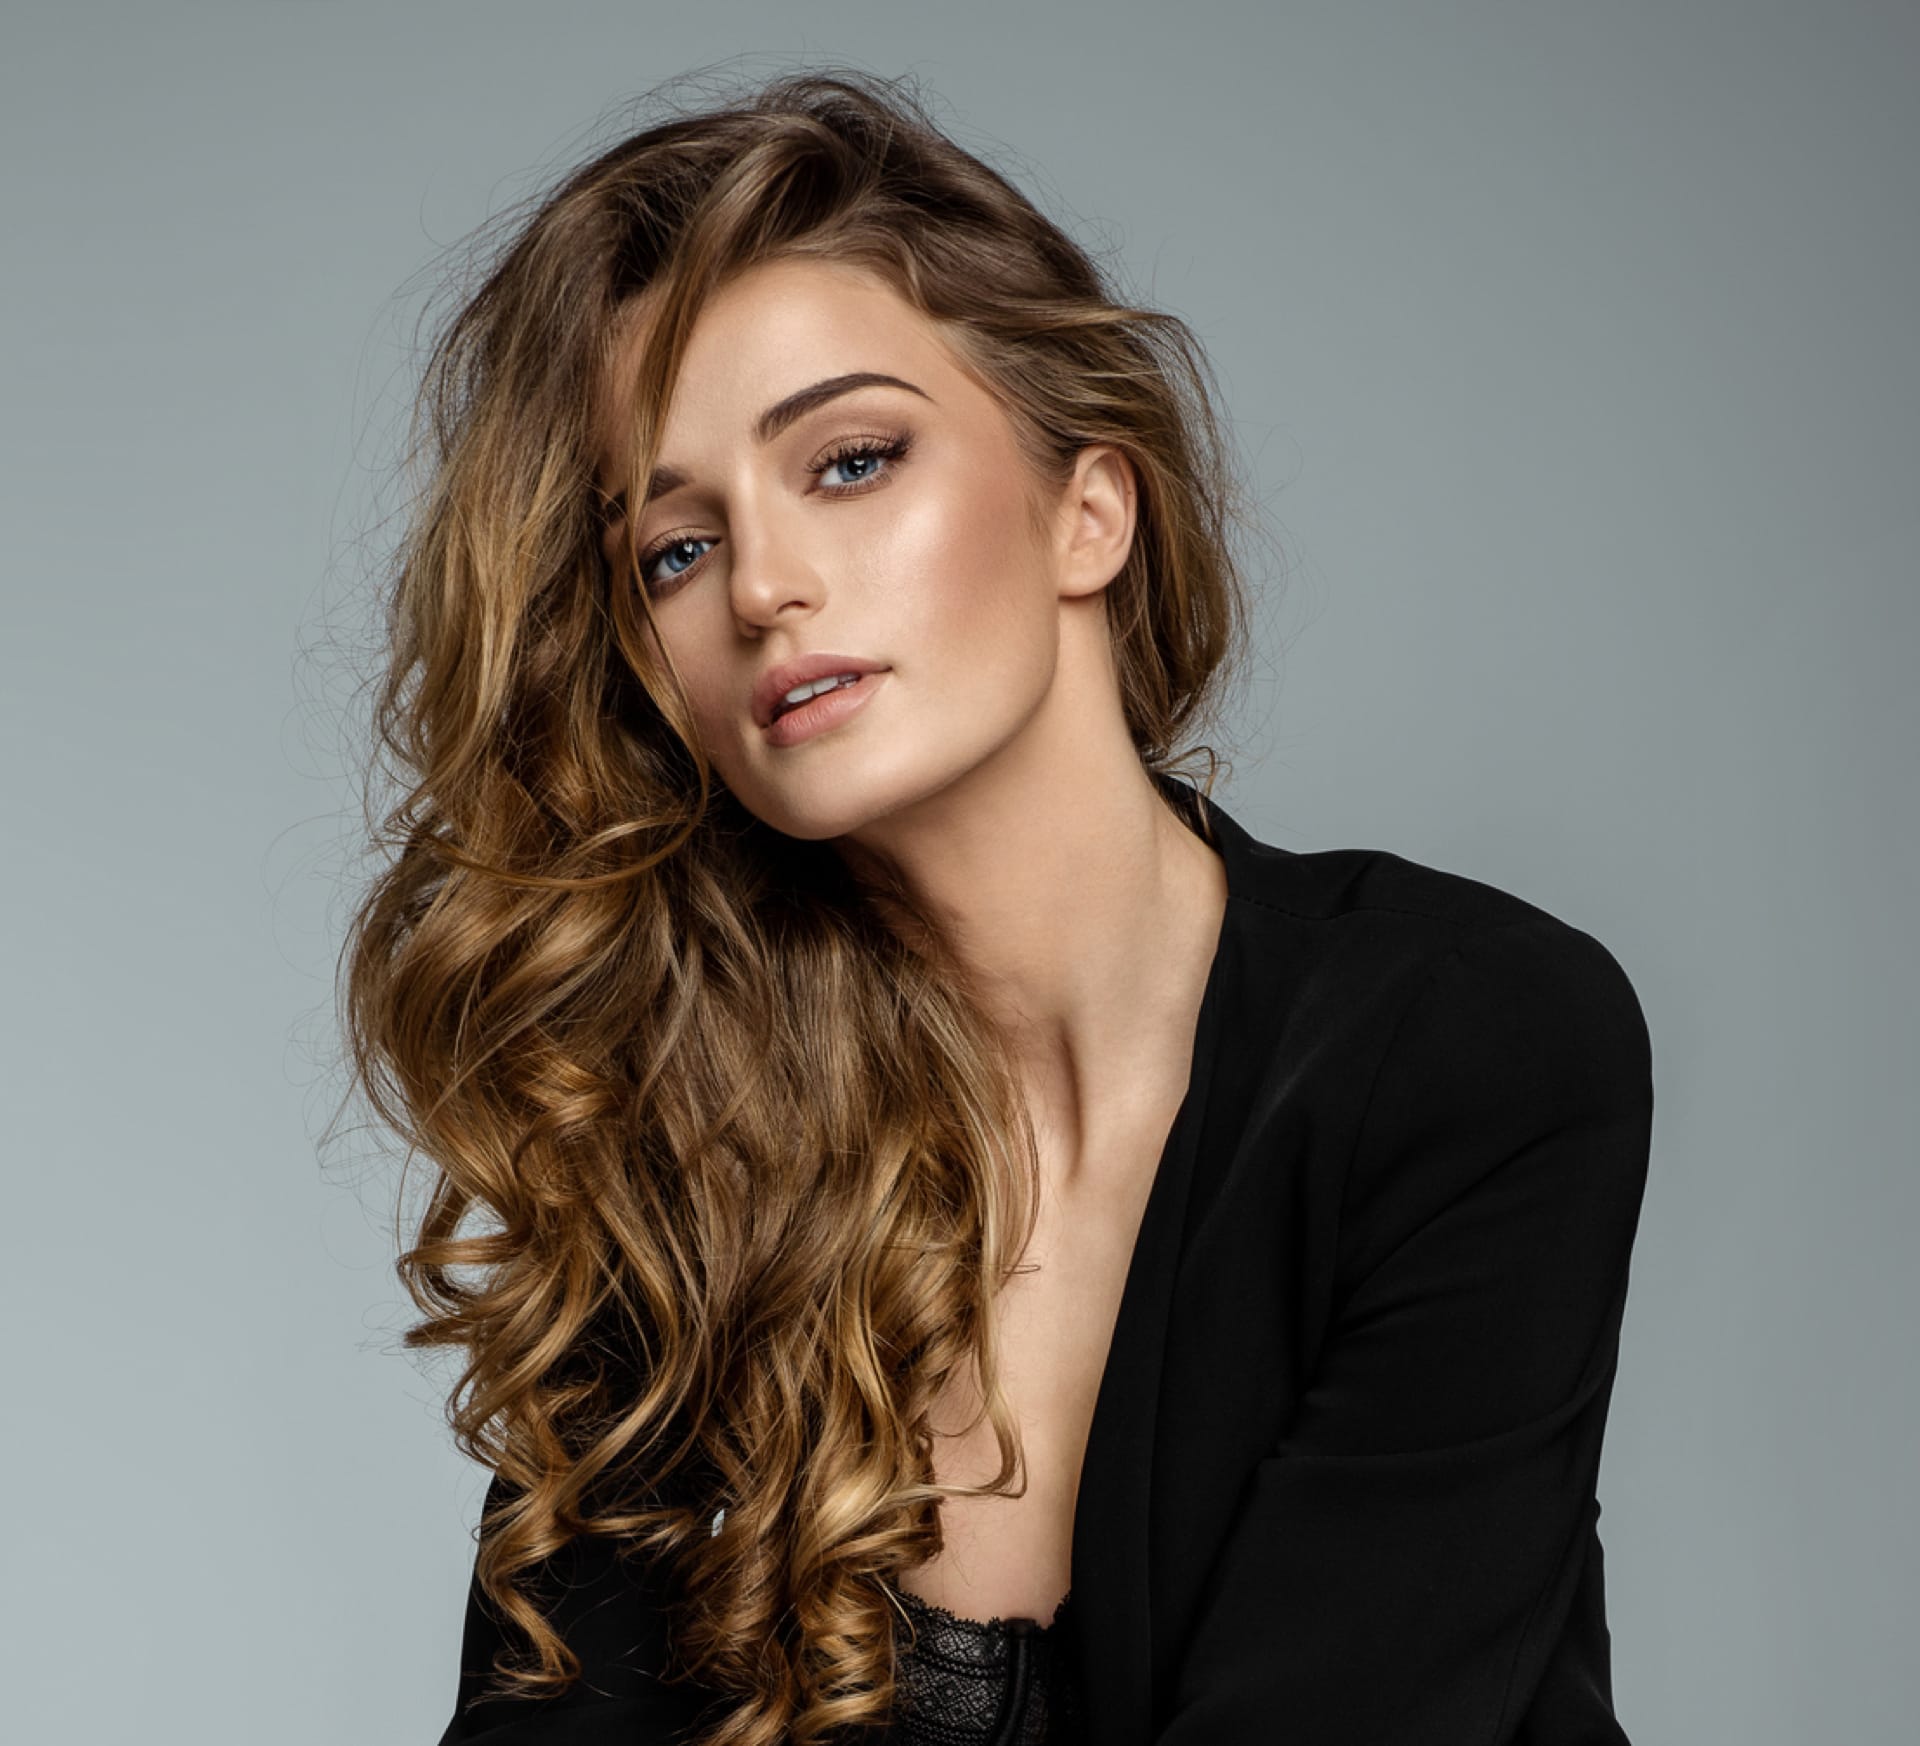 Gorgeus woman With attractive ears and amazing hair